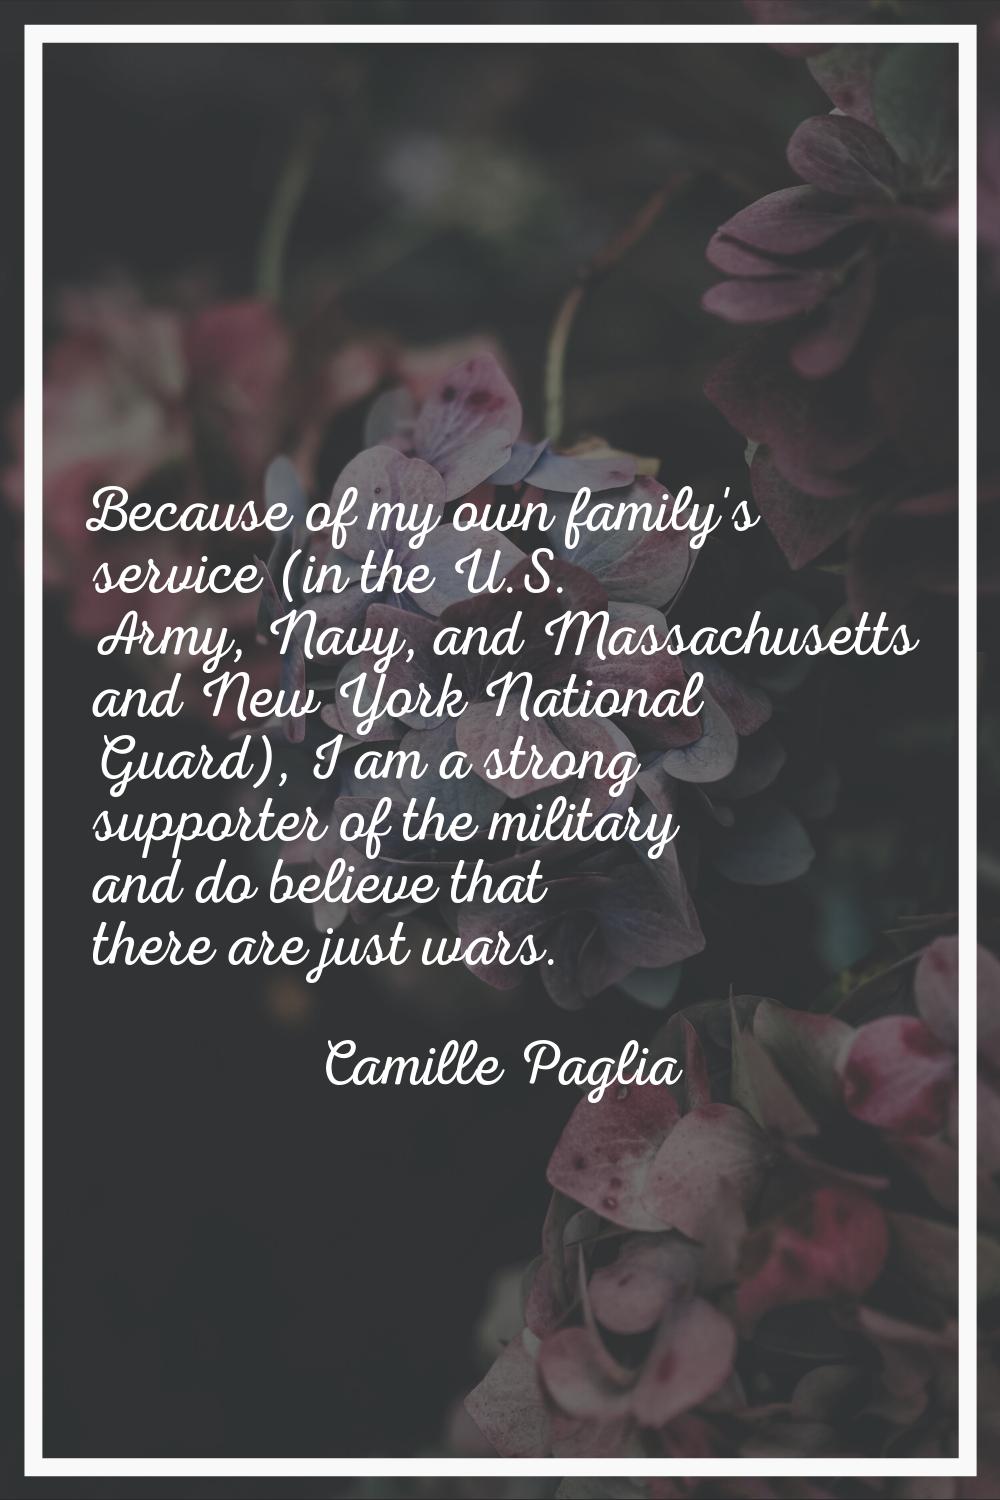 Because of my own family's service (in the U.S. Army, Navy, and Massachusetts and New York National